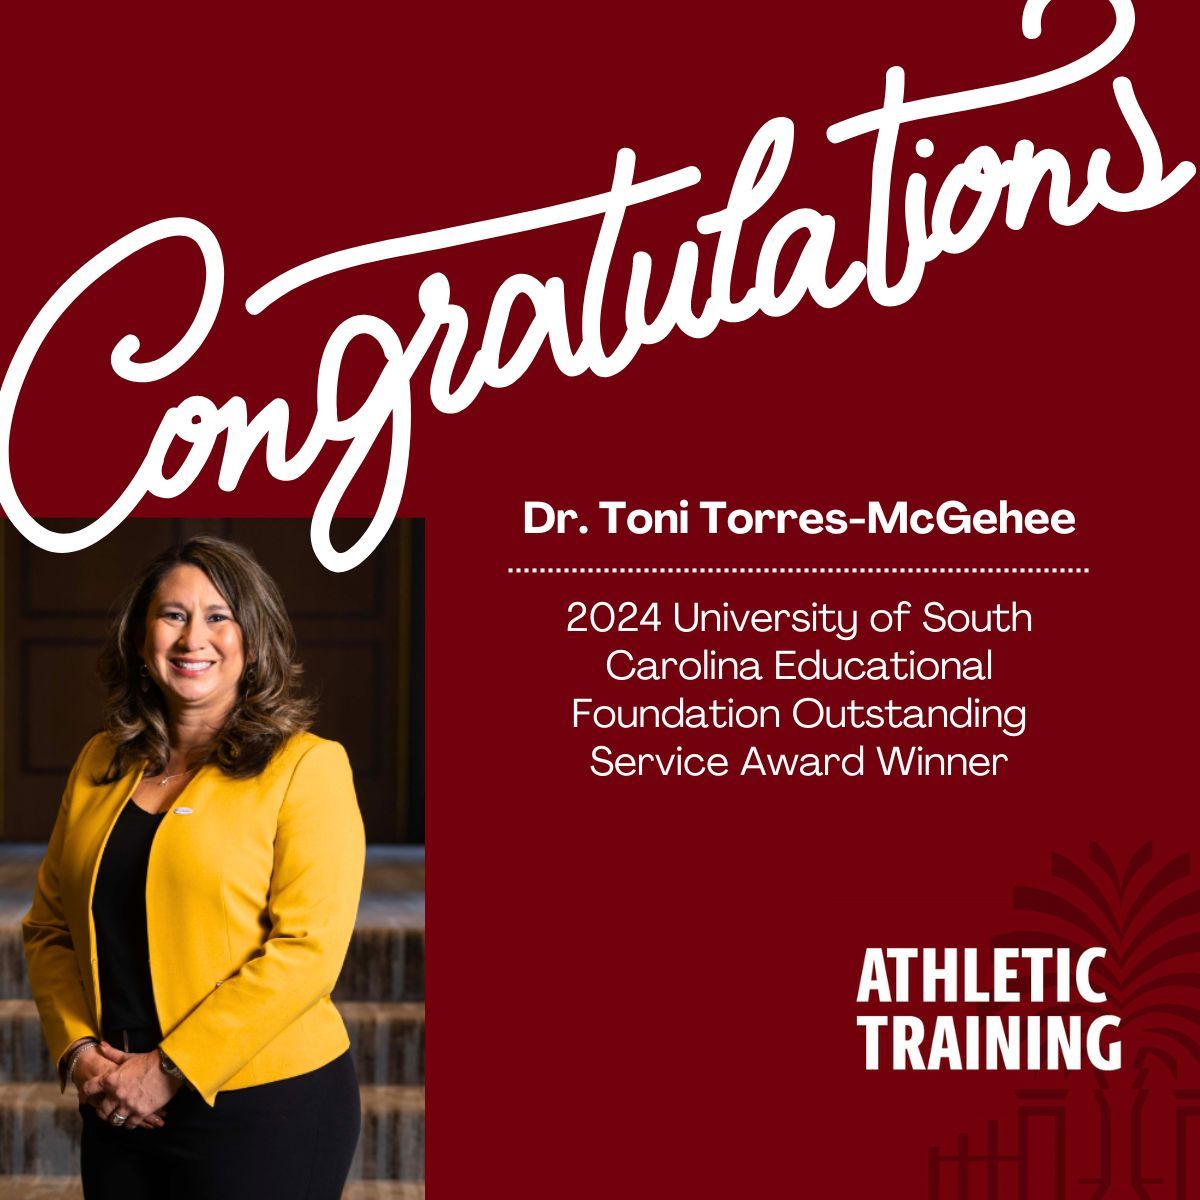 The Office of the Provost announced the 2024 USC Faculty Award winners, which included our very own Dr. TTM! Congratulations!!! #GamecockAT buff.ly/3xcL1fv